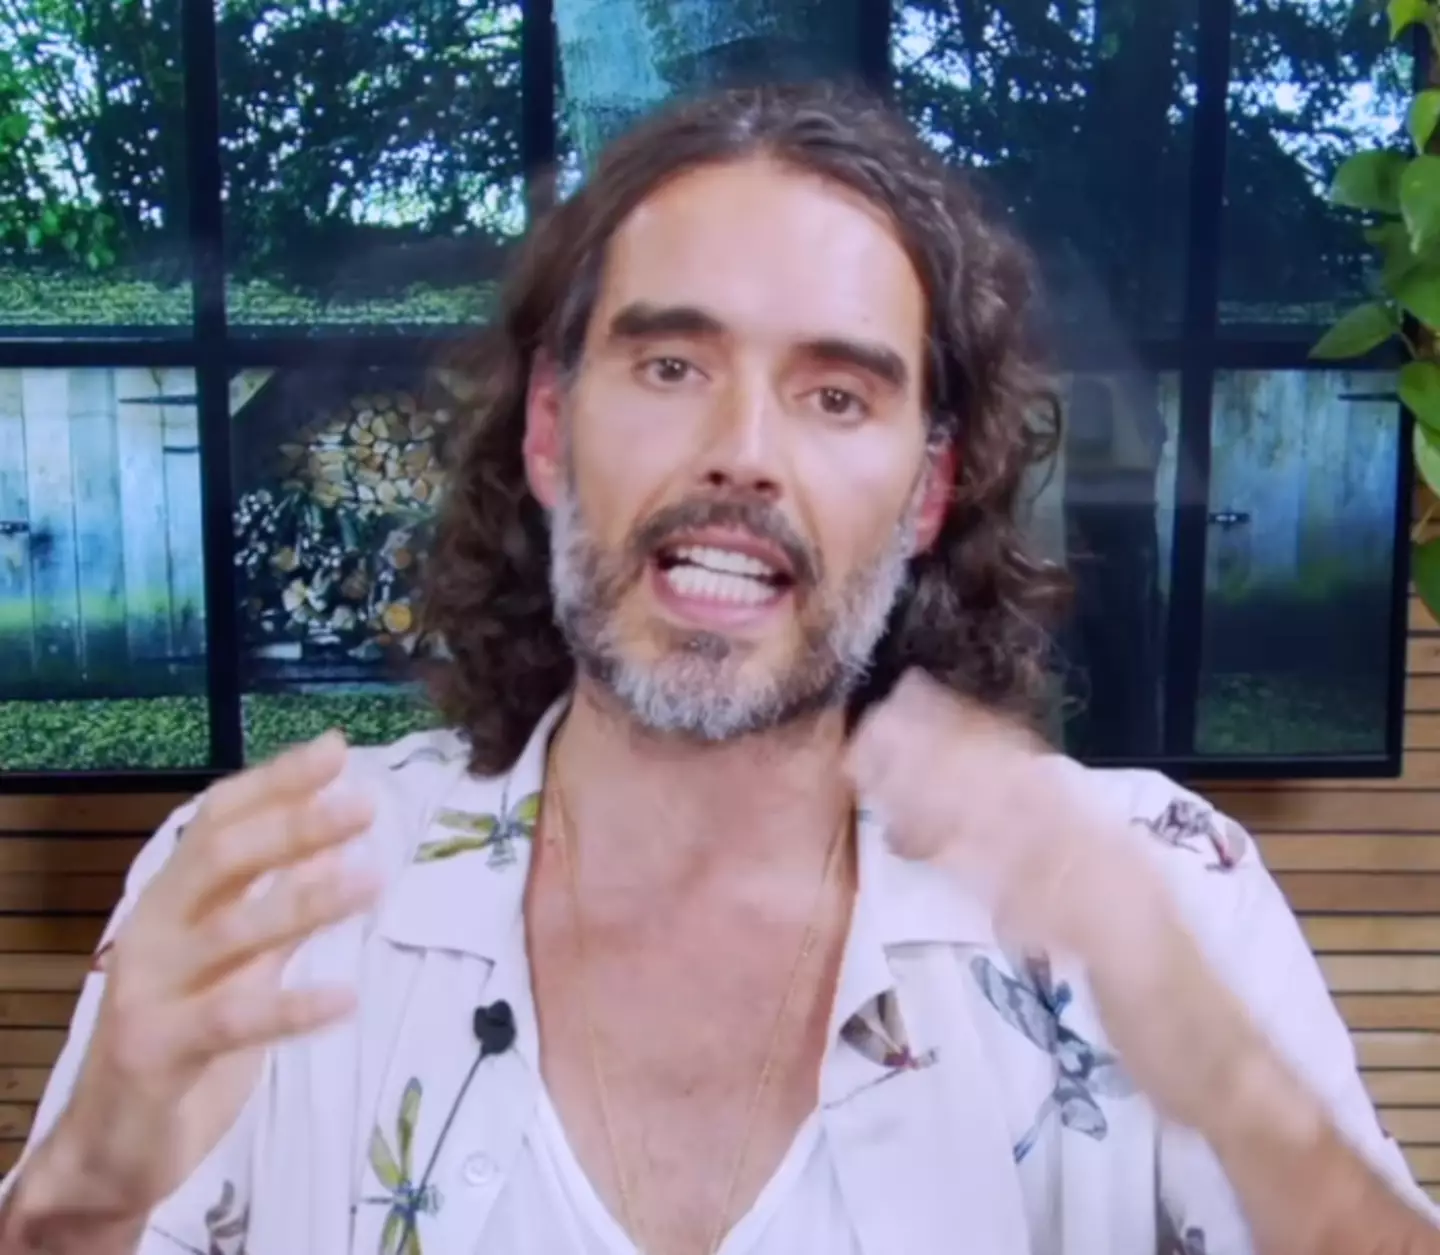 Russell Brand has denied the allegations made against him.